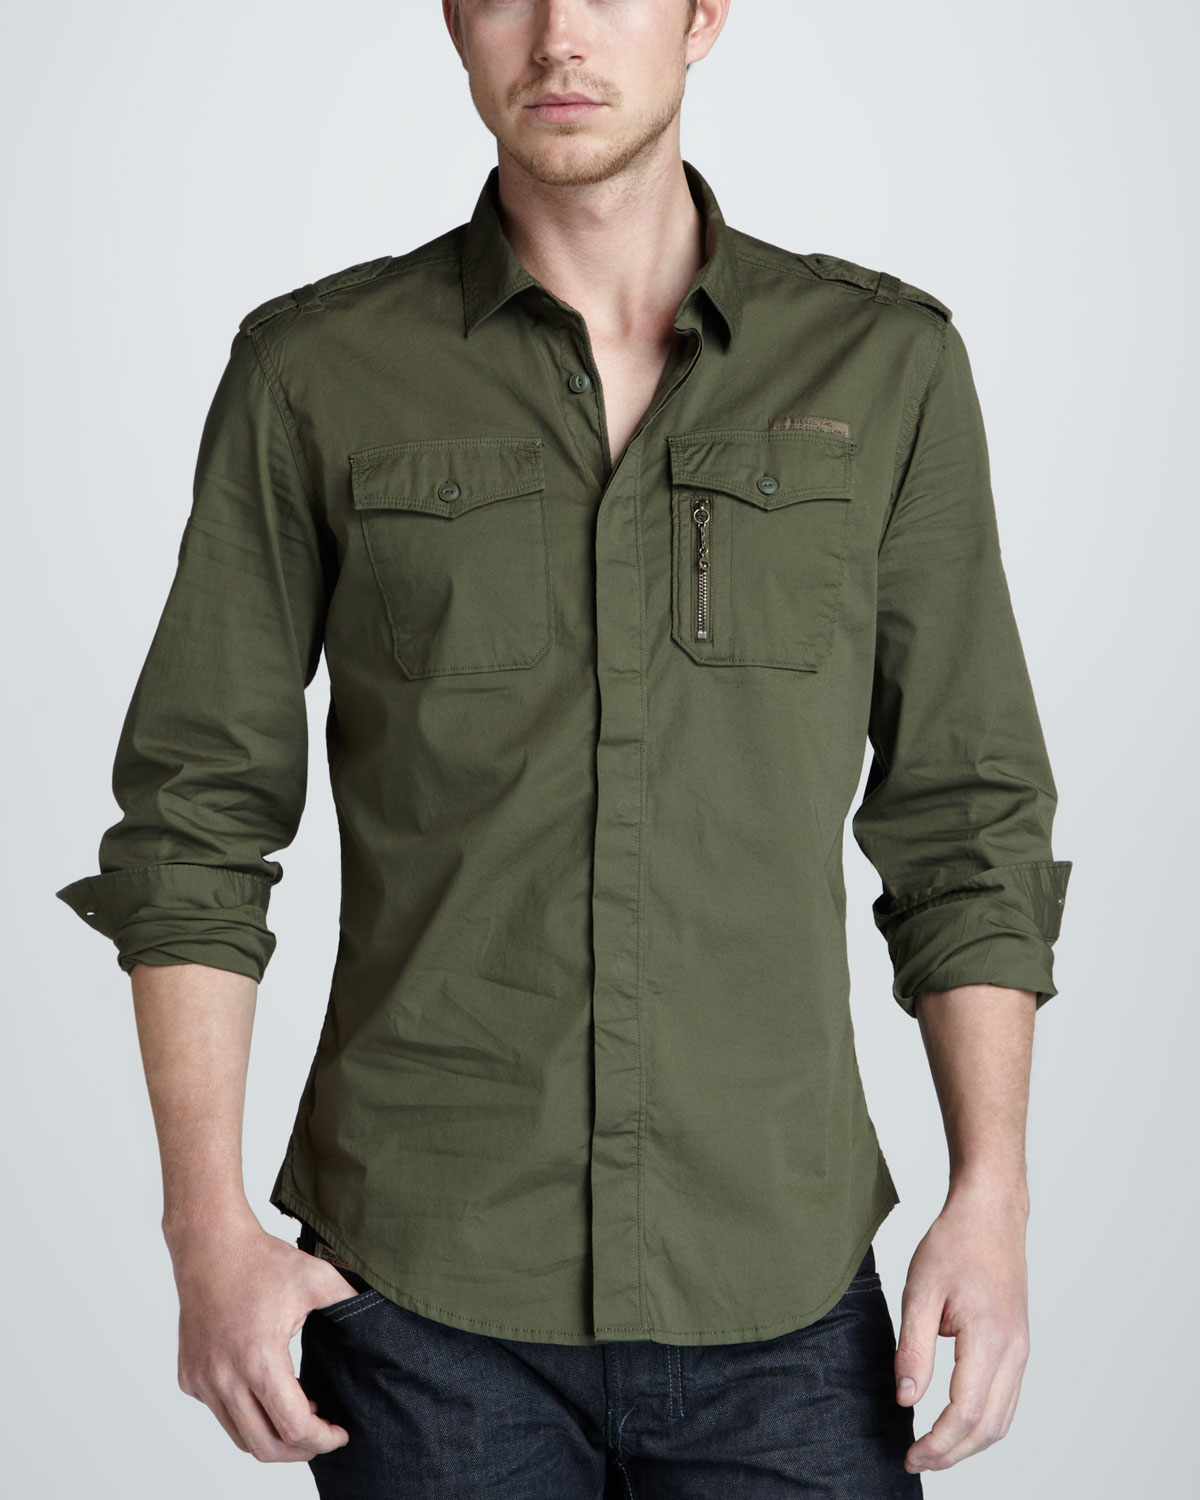 Diesel Green Military Shirt Product 1 12856855 133631184 